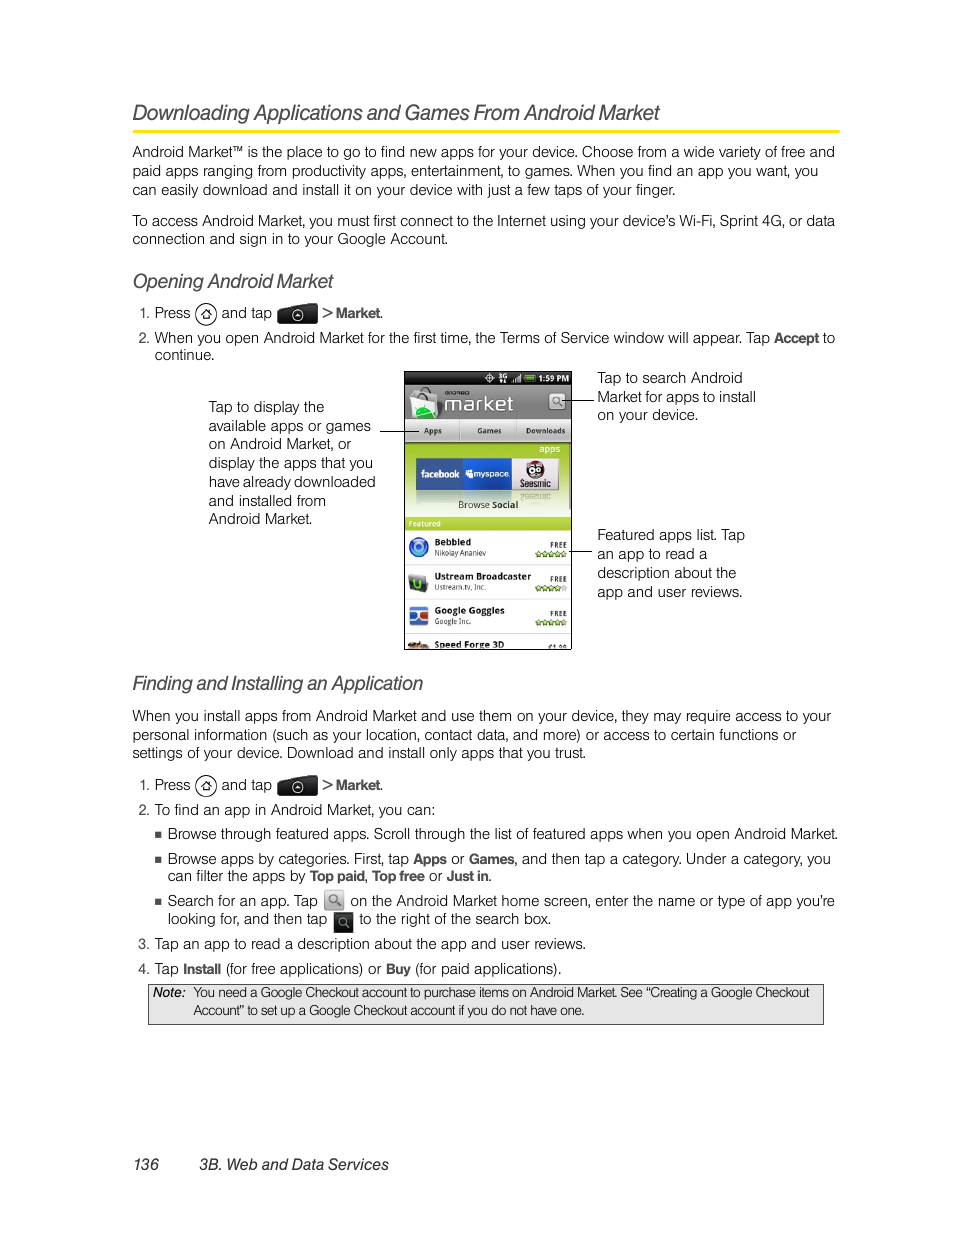 Opening android market, Finding and installing an application | HTC EVO 4G User Manual | Page 146 / 197